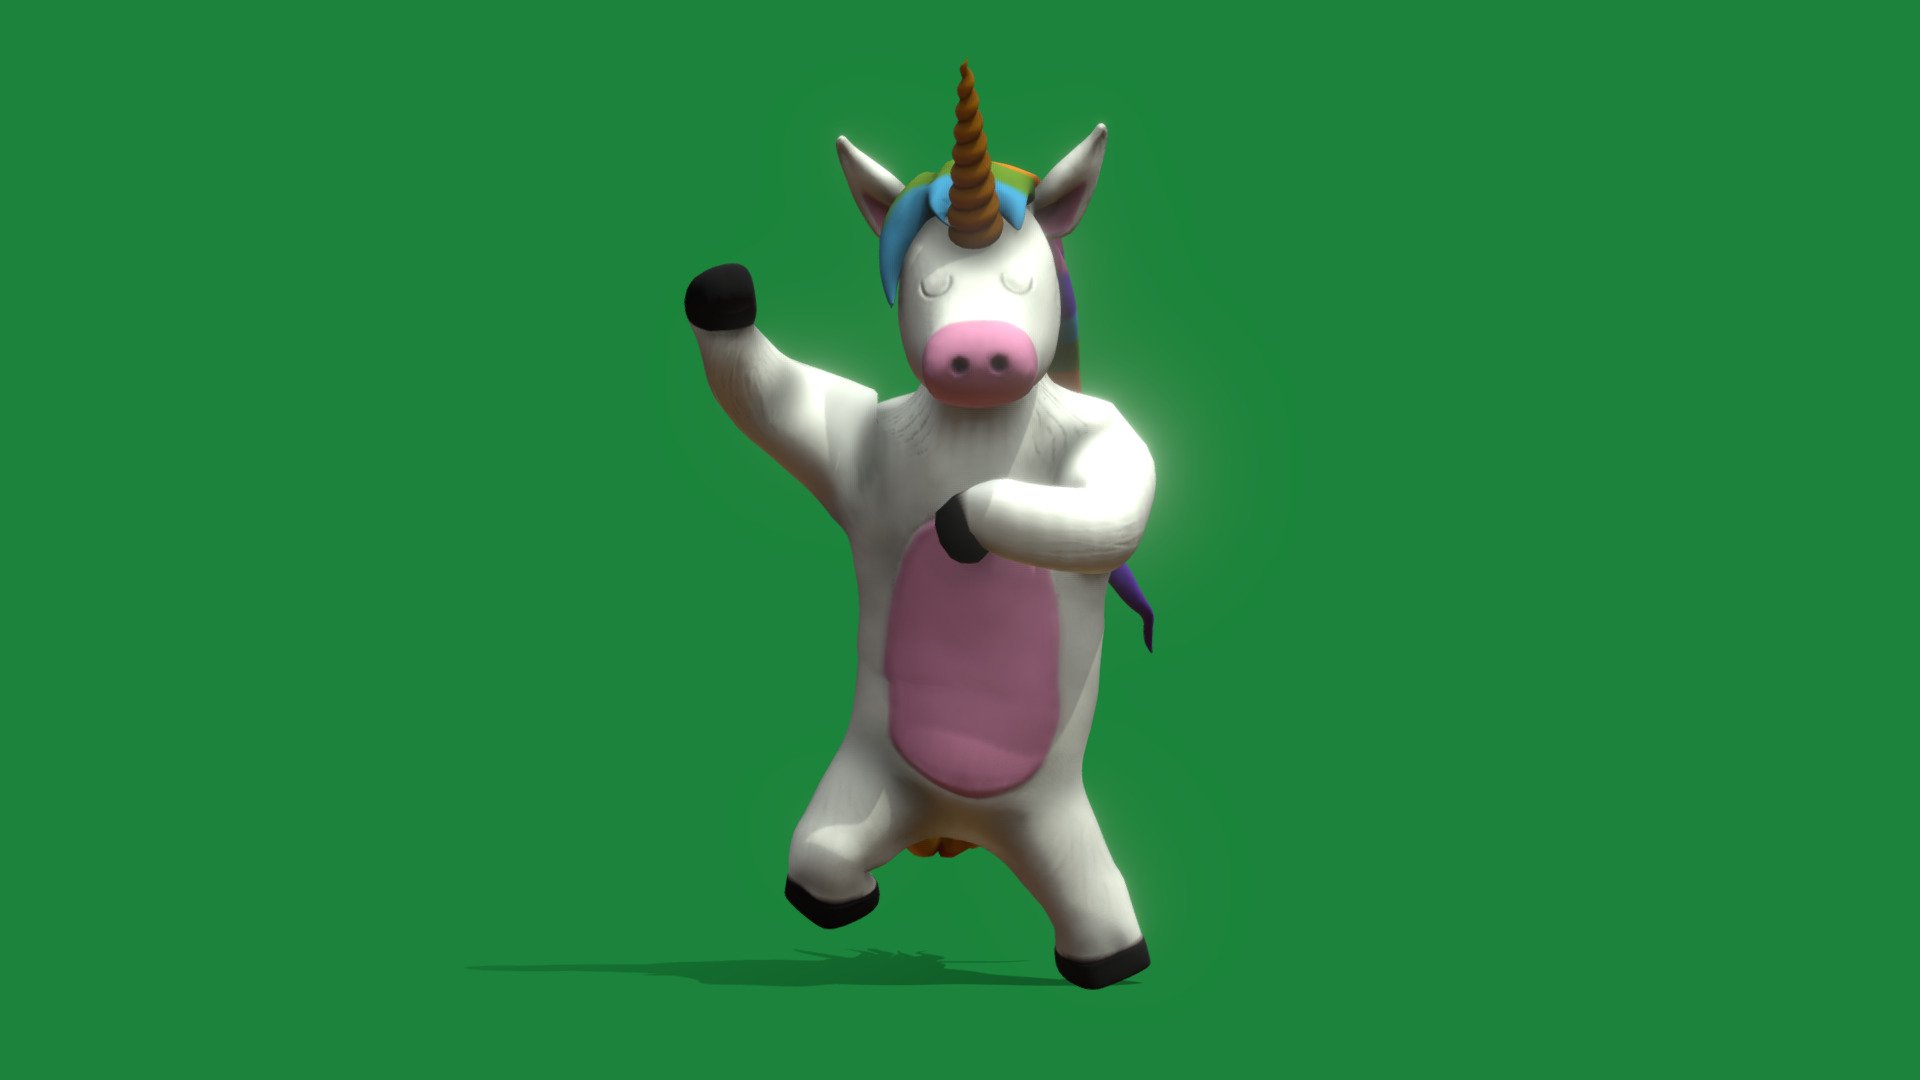 Kawaii Unicorn rigged, ready for animation.
Textures included
UV Maped
T Pose and several animations included 3d model